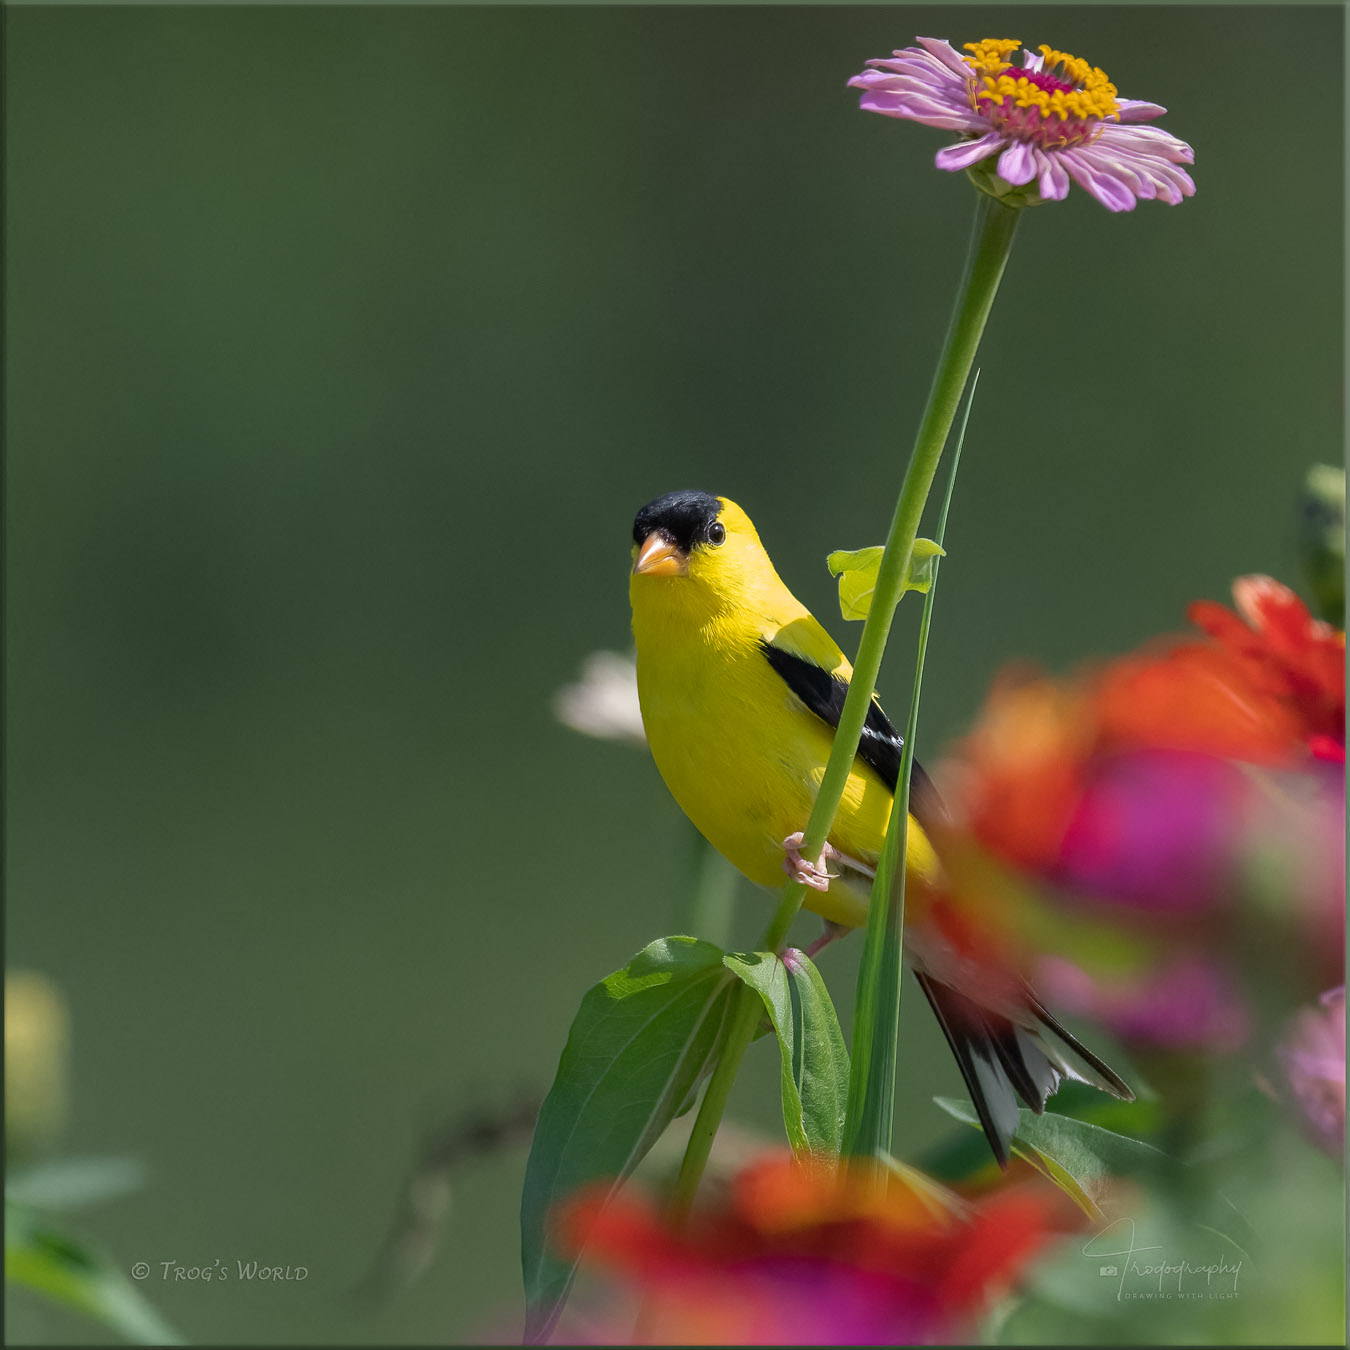 American Goldfinch perched on a flower